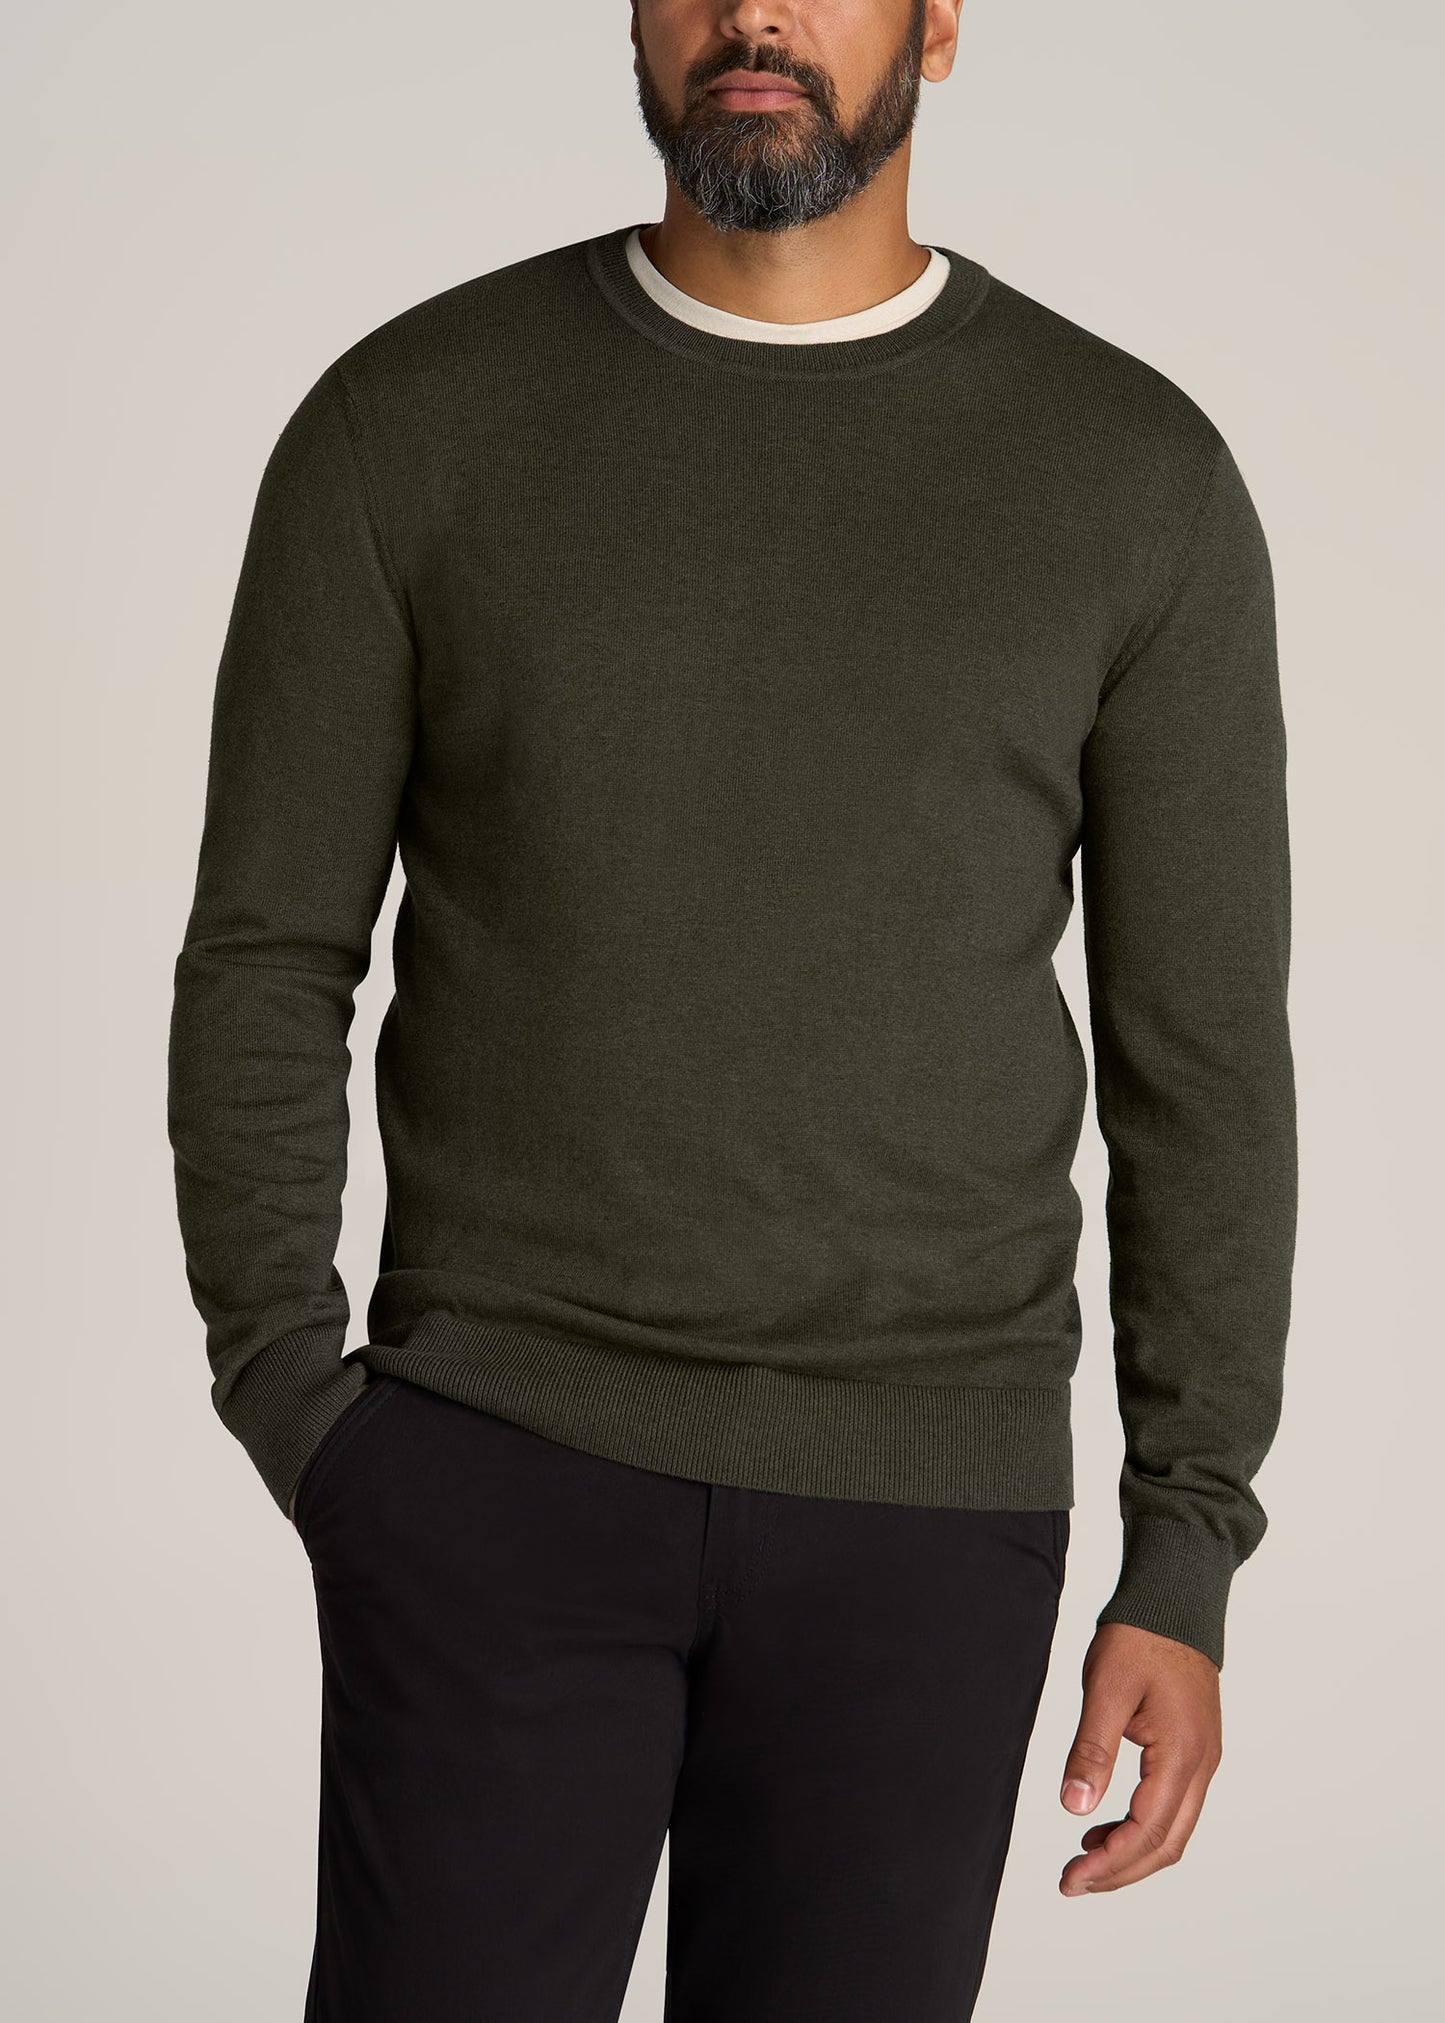 American-Tall-Men-Everyday-Crew-Neck-Sweater-Dark-Green-Olive-front